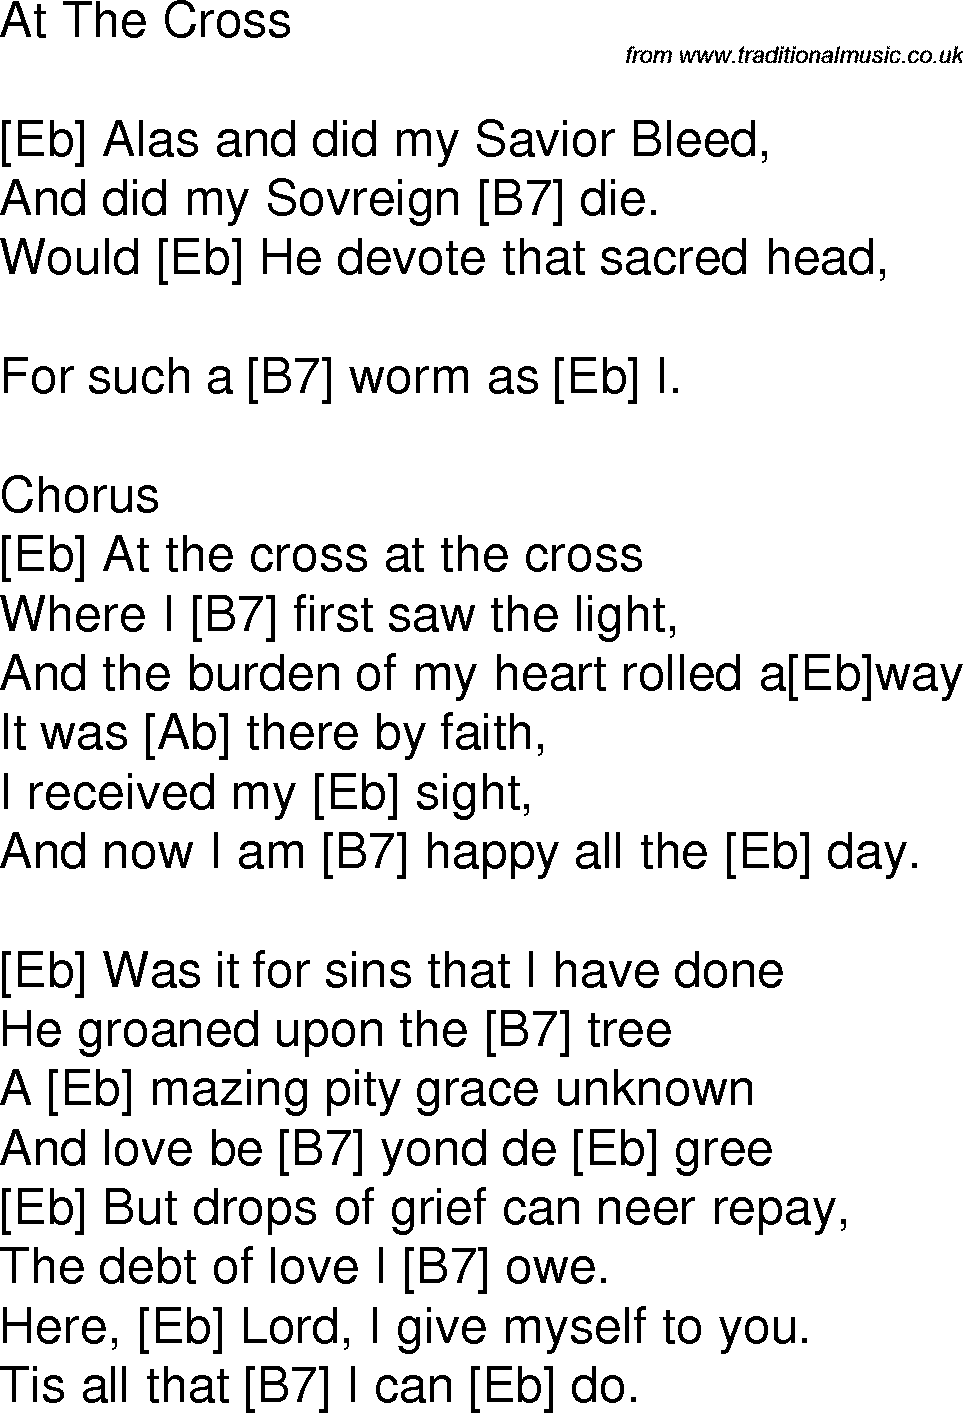 Old time song lyrics with chords for At The Cross Eb